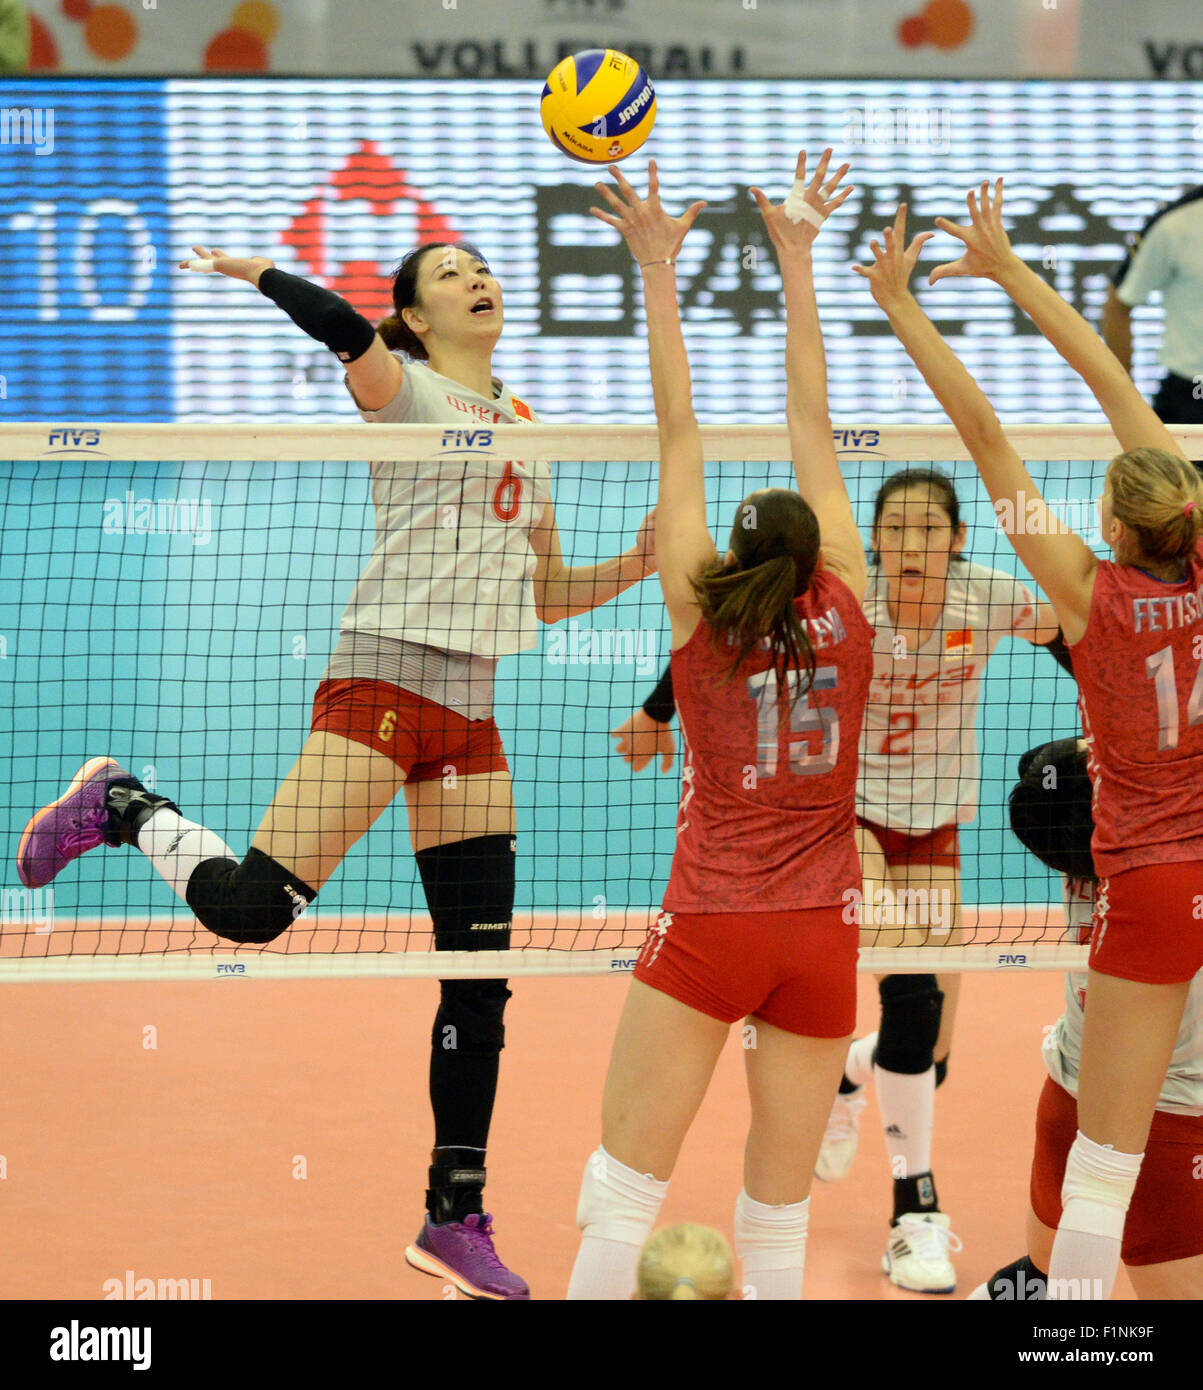 Serbia claim title in historic Volleyball World Championship, China finish  3rd 